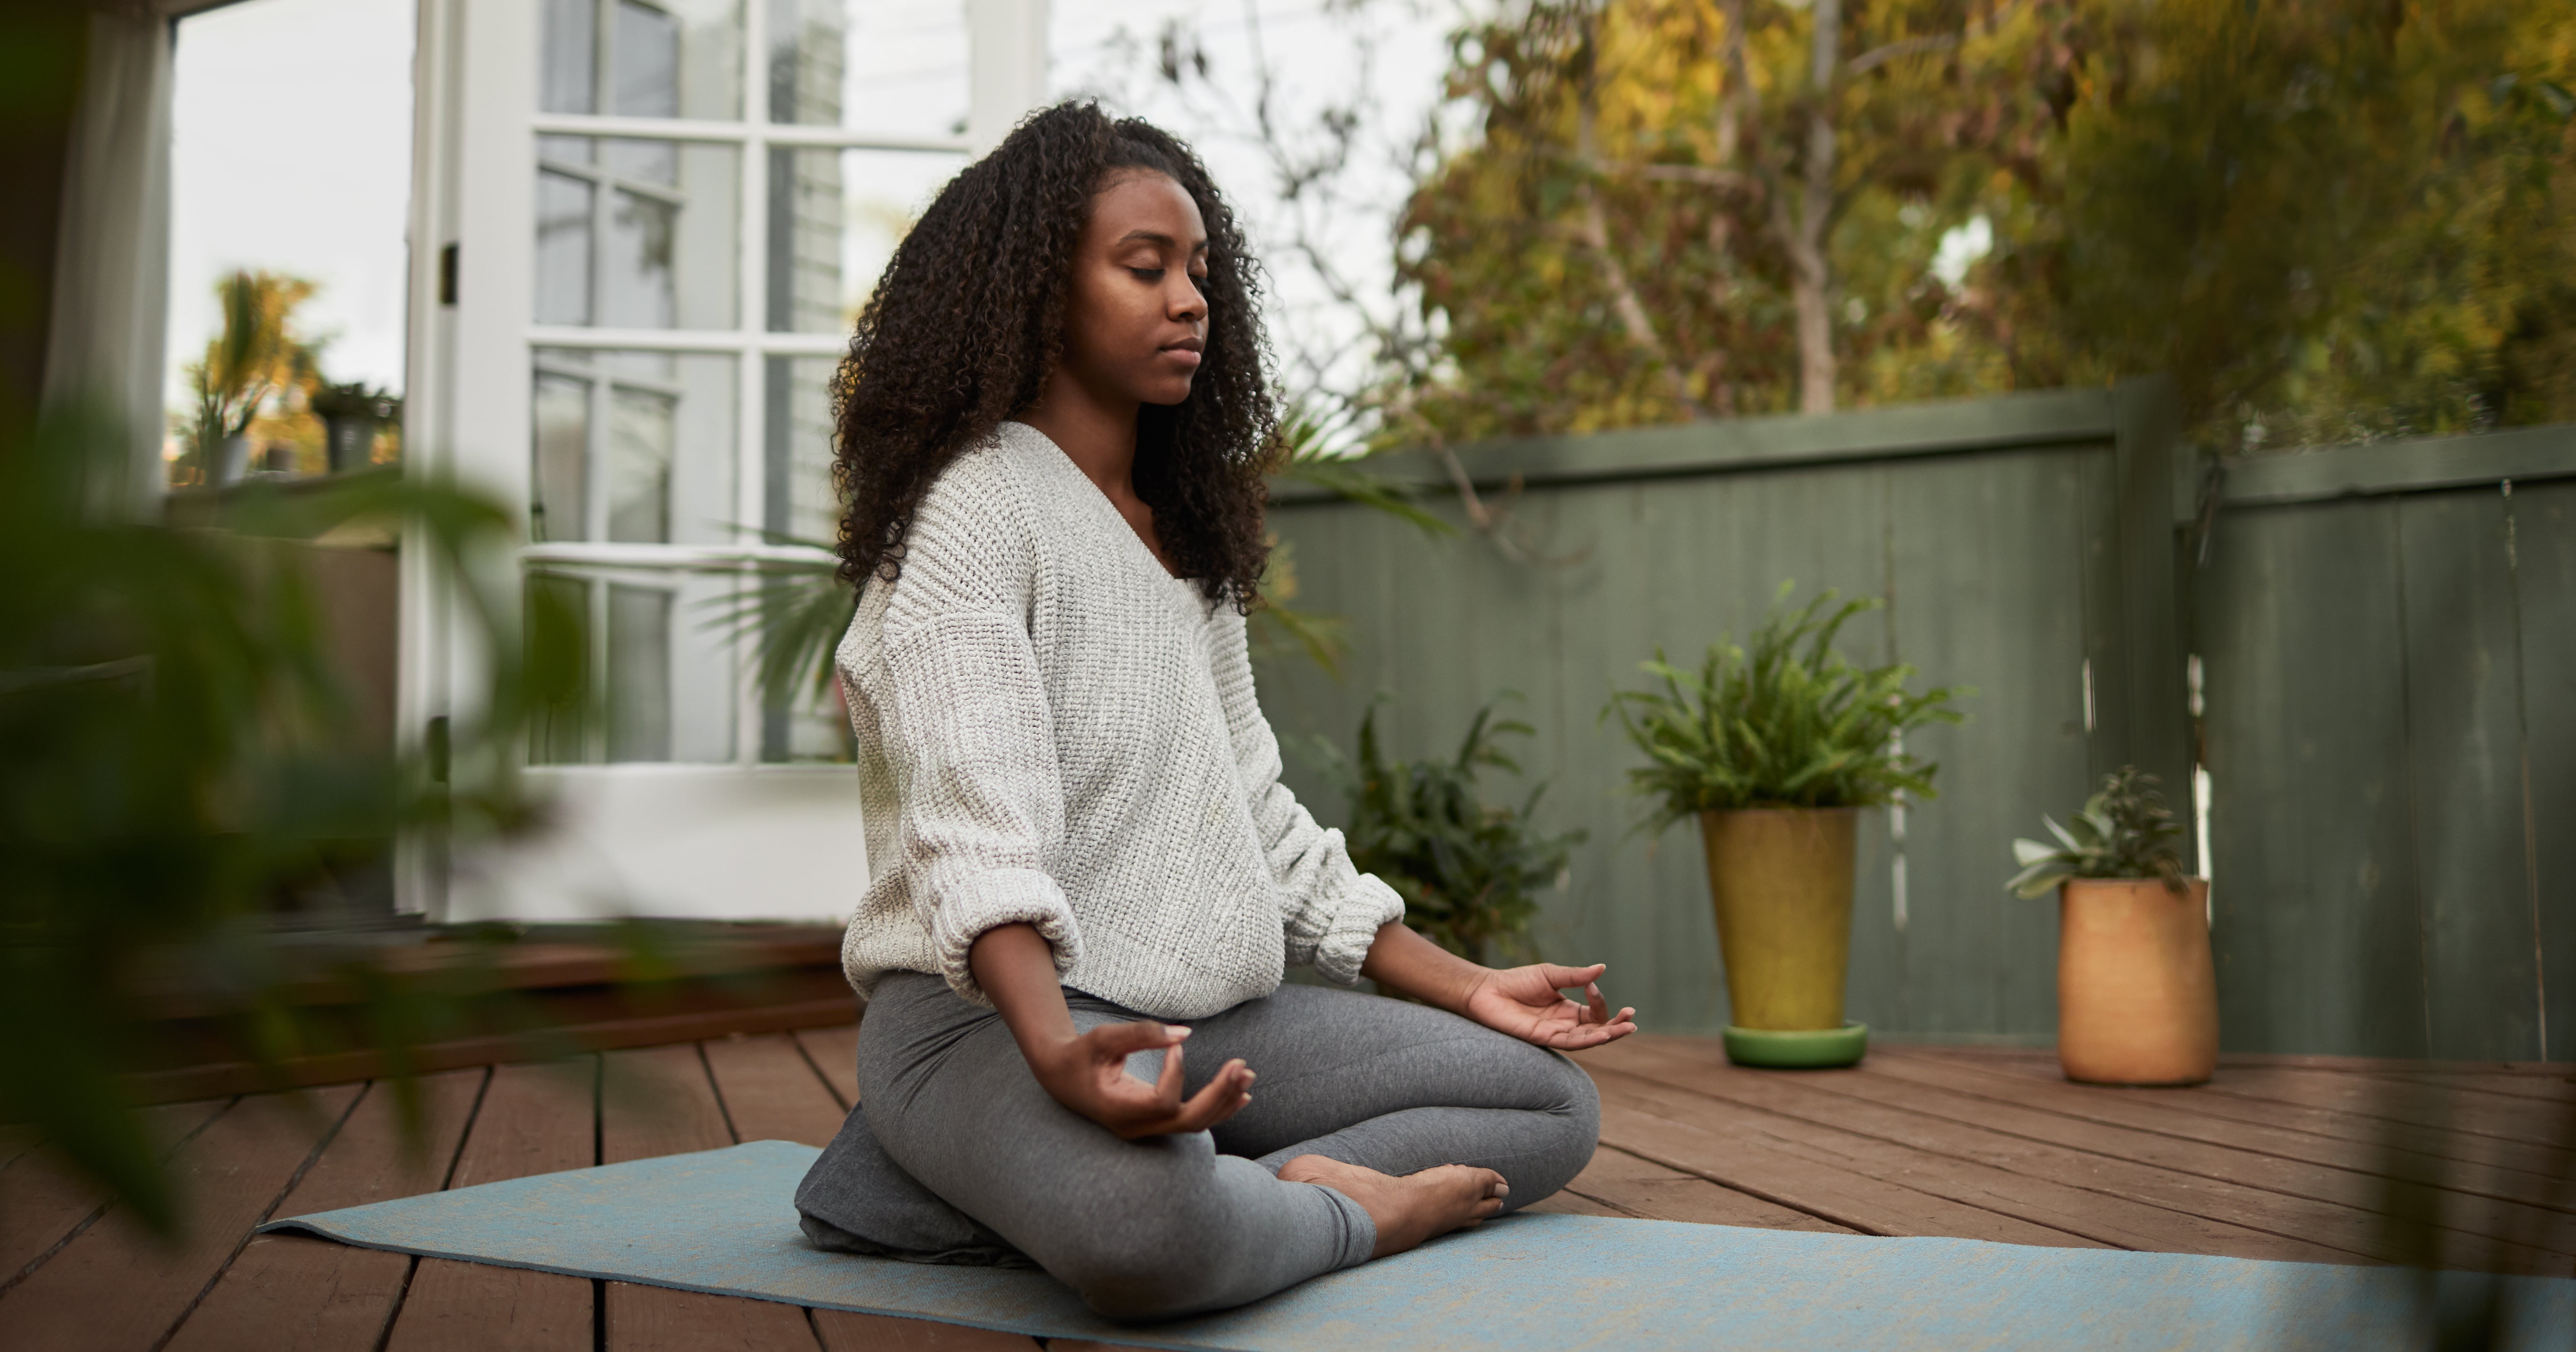 I Tried Meditating for 15 Minutes Every Day for a Month